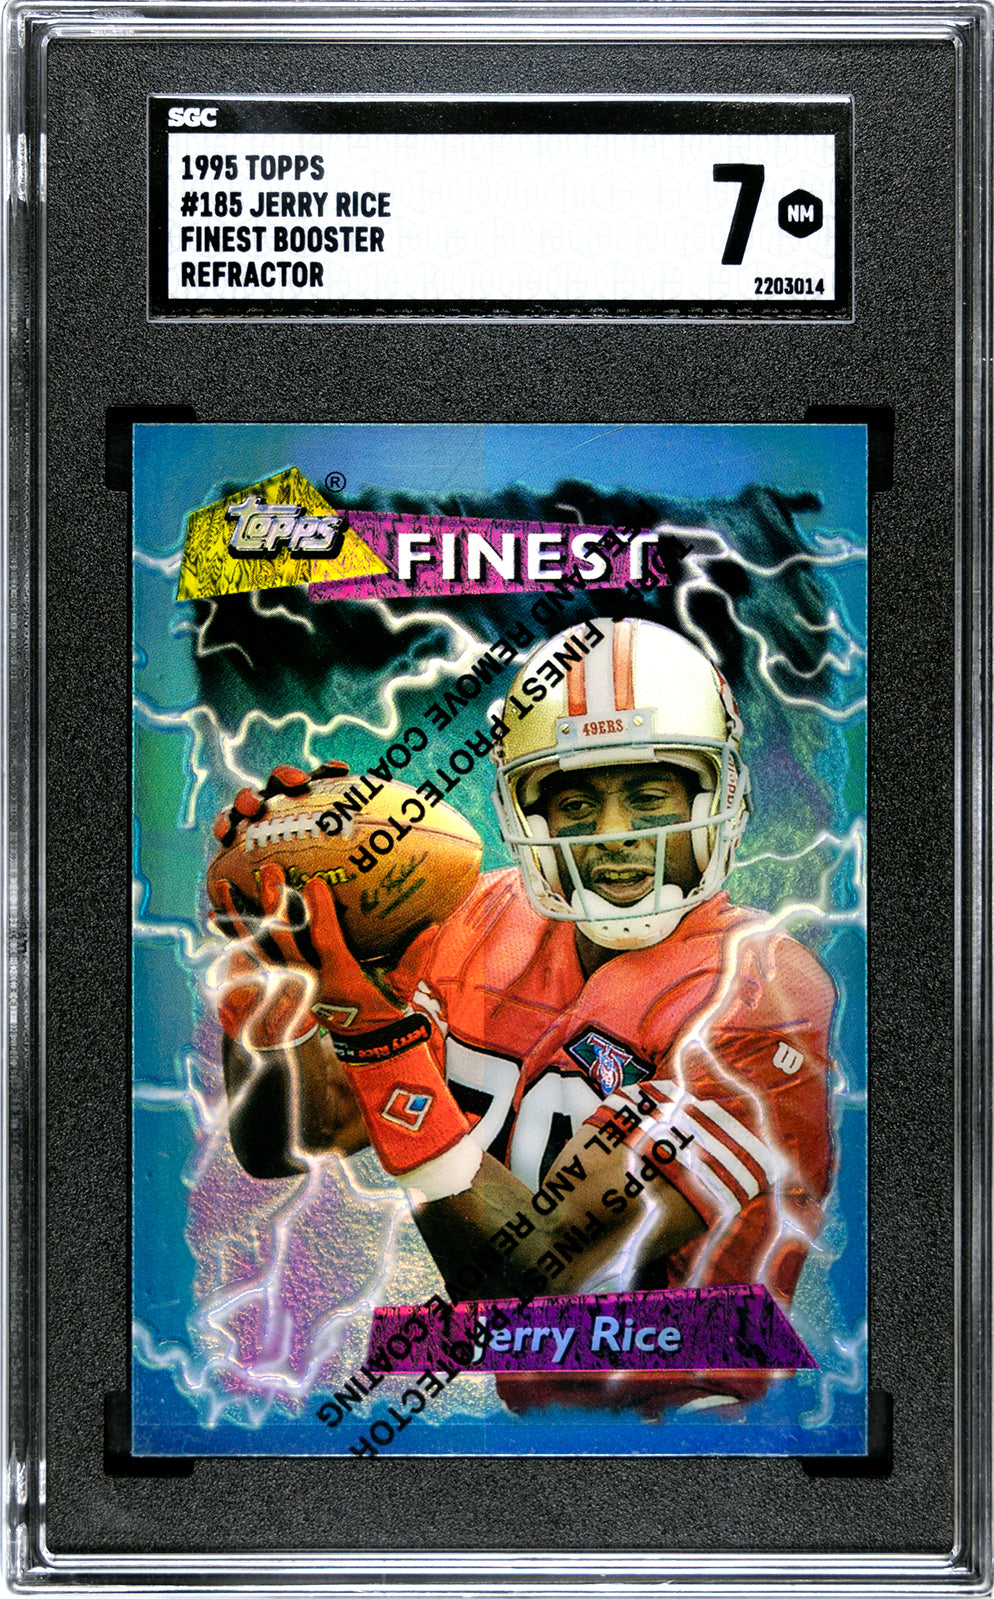 1995 Topps Finest Boosters Refractor with coating #B185 Jerry Rice SGC –  Rileys Memorabilia and Cards